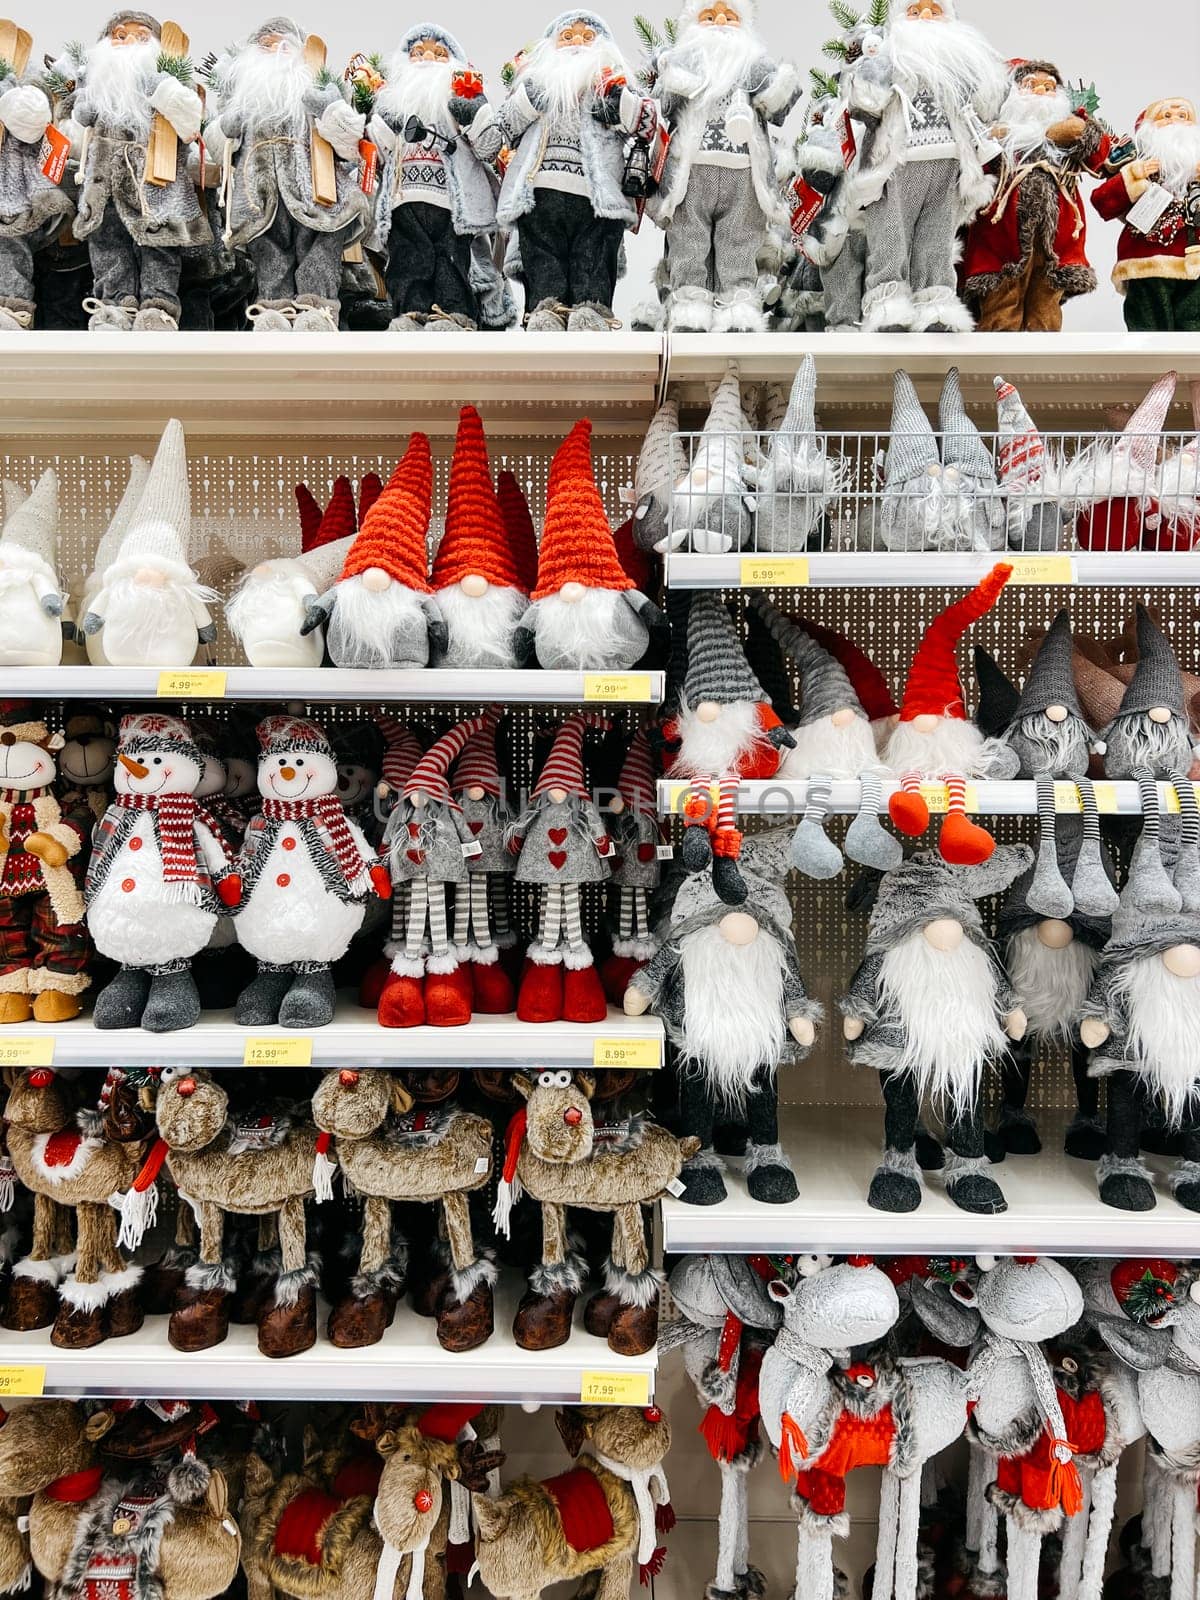 Multi-colored figurines of Santa Claus, gnomes and deer are on the shelves of the store. High quality photo